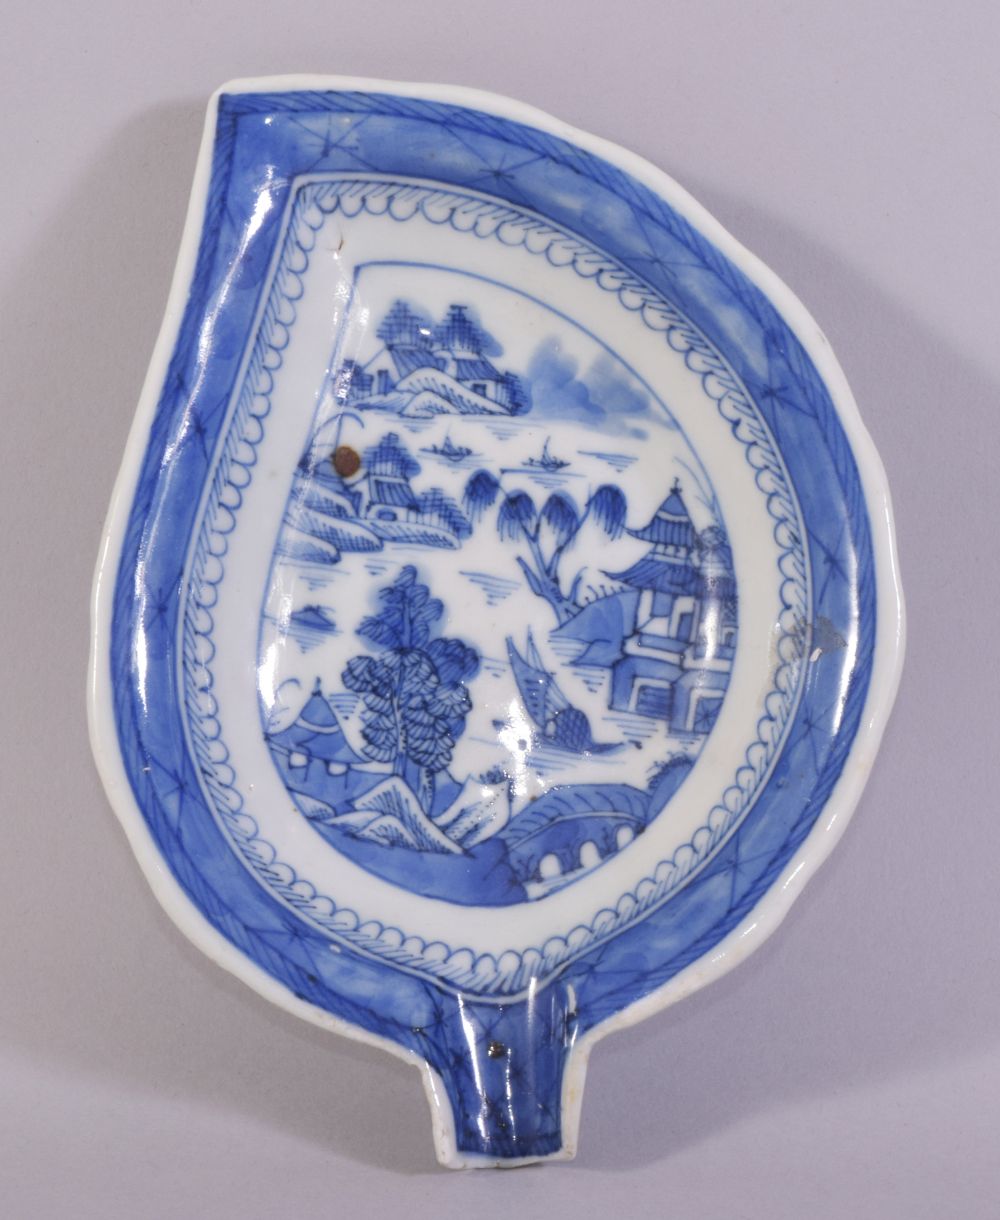 A CHINESE BLUE AND WHITE PORCELAIN LEAF SHAPE DISH, painted with a landscape setting, 17.5cm x